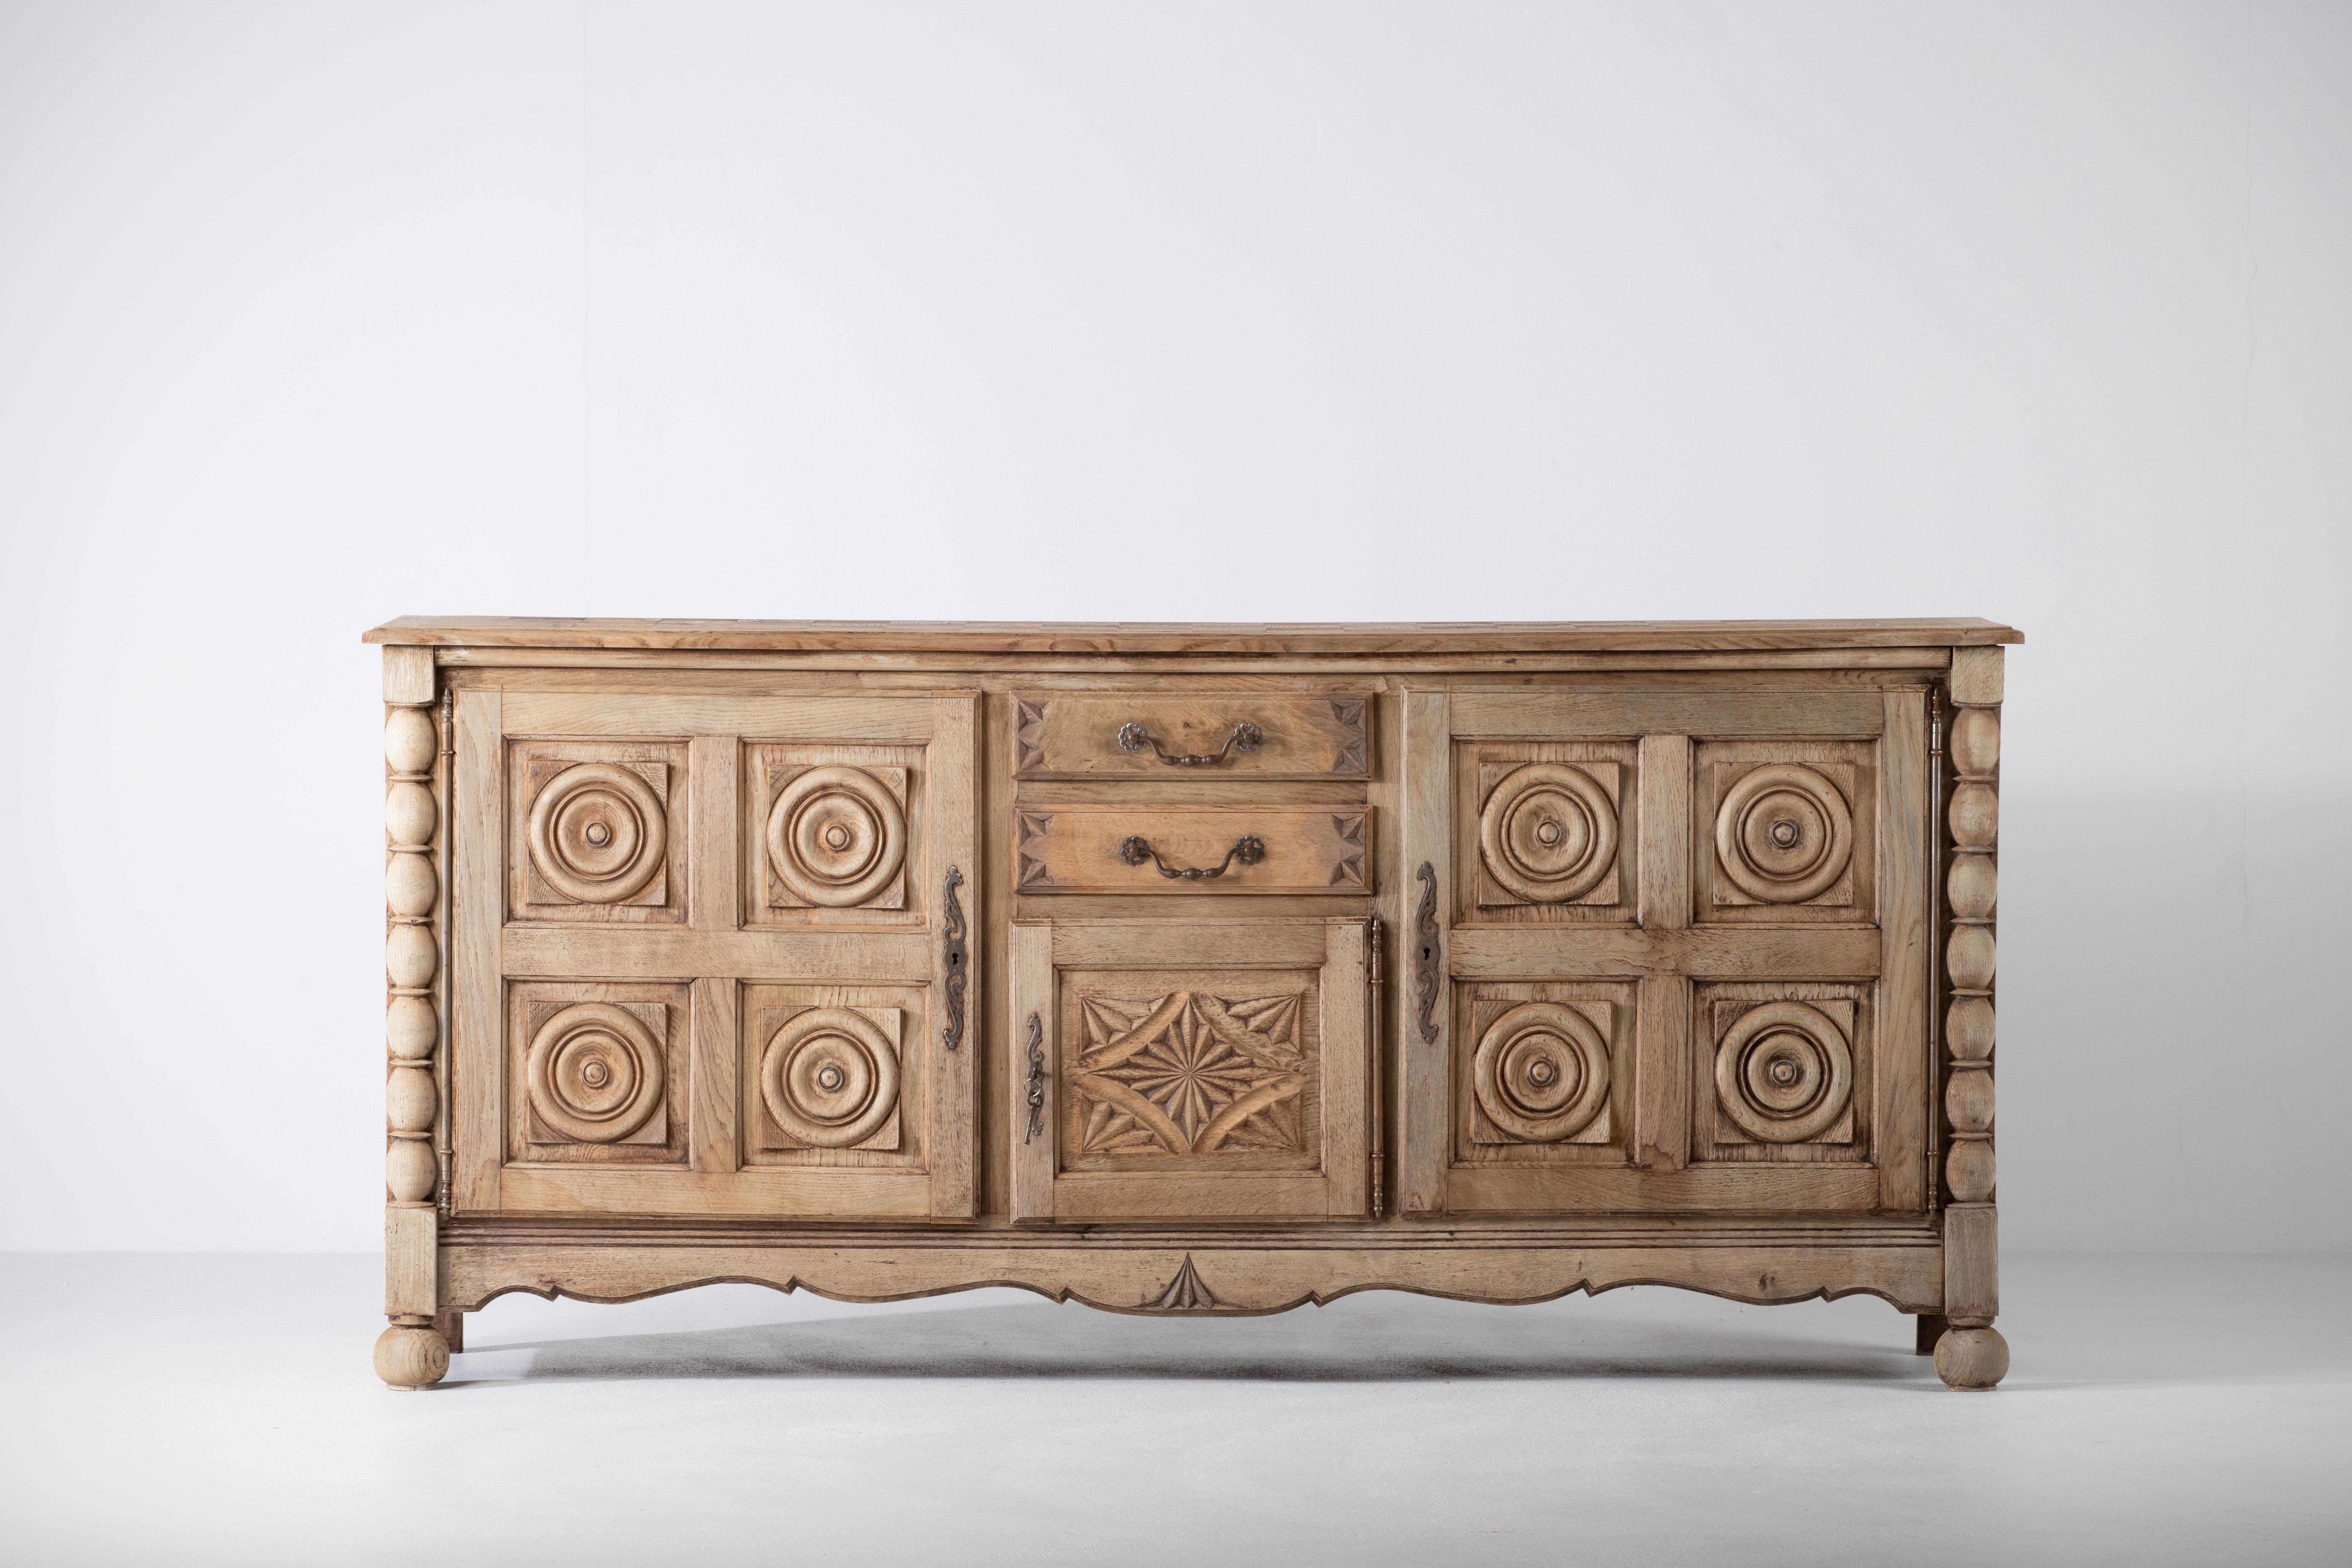 Unearthed in Normandy, this Breton style piece of furniture in solid oak will bring a touch of authenticity to an interior.
The sideboard consists of two compartments with shelves whose doors are covered with circular patterns typical of the